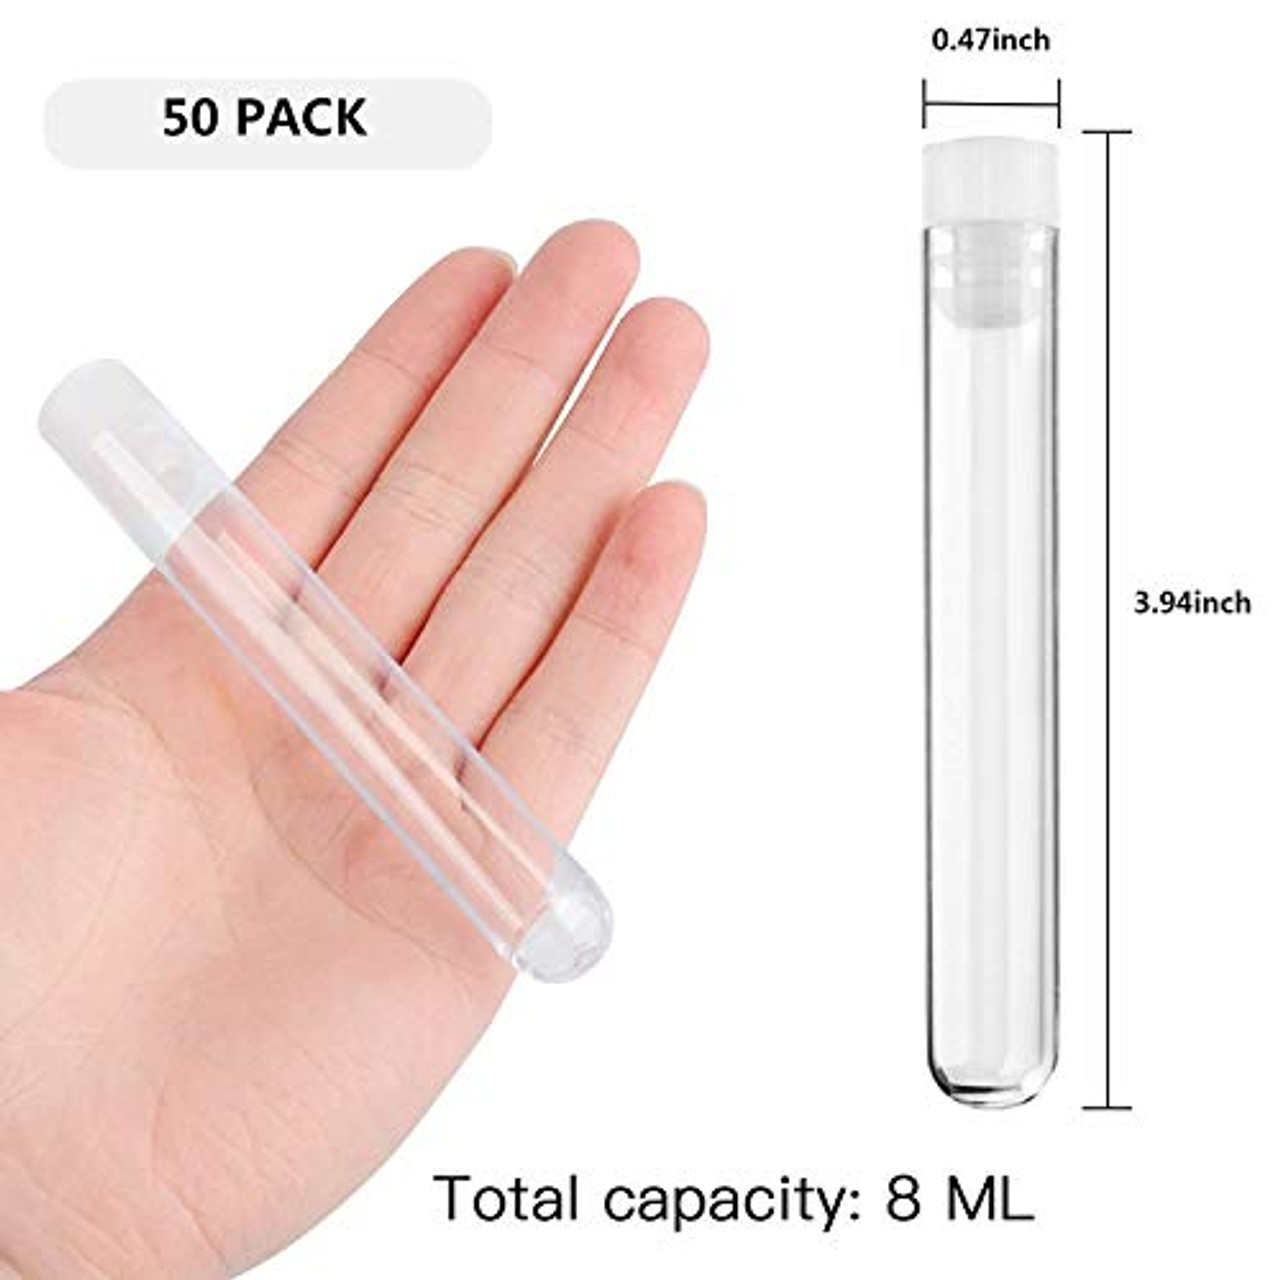 Joyclub 50pcs 12x100mm(8ml) Clear Plastic Test Tubes with Caps for Scientific Experiments, Halloween, Christmas, Scientific Themed Kids Birthday Party